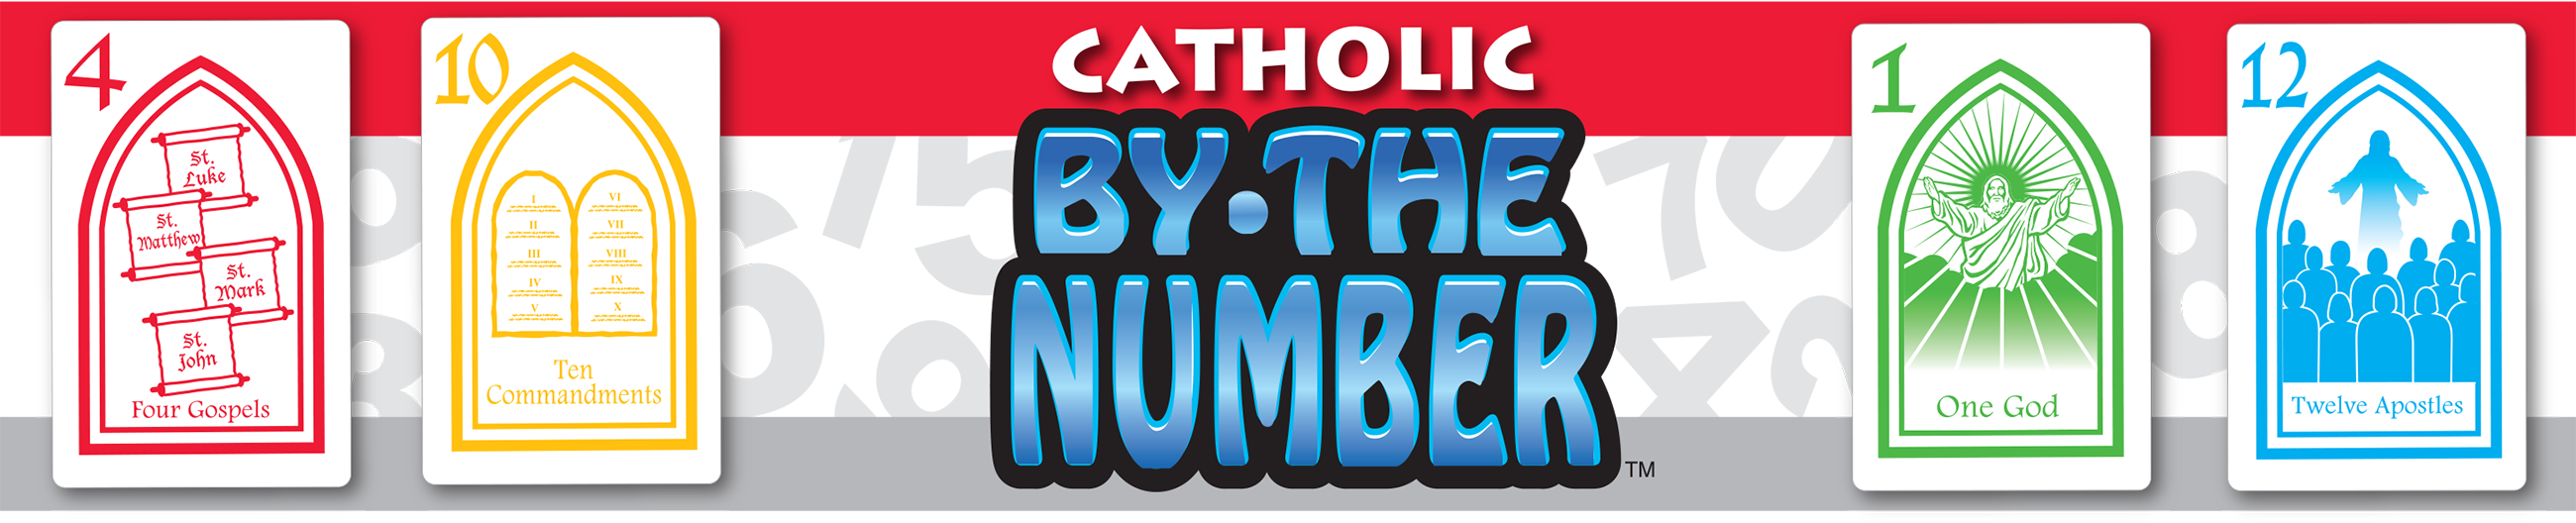 Catholic By The Number